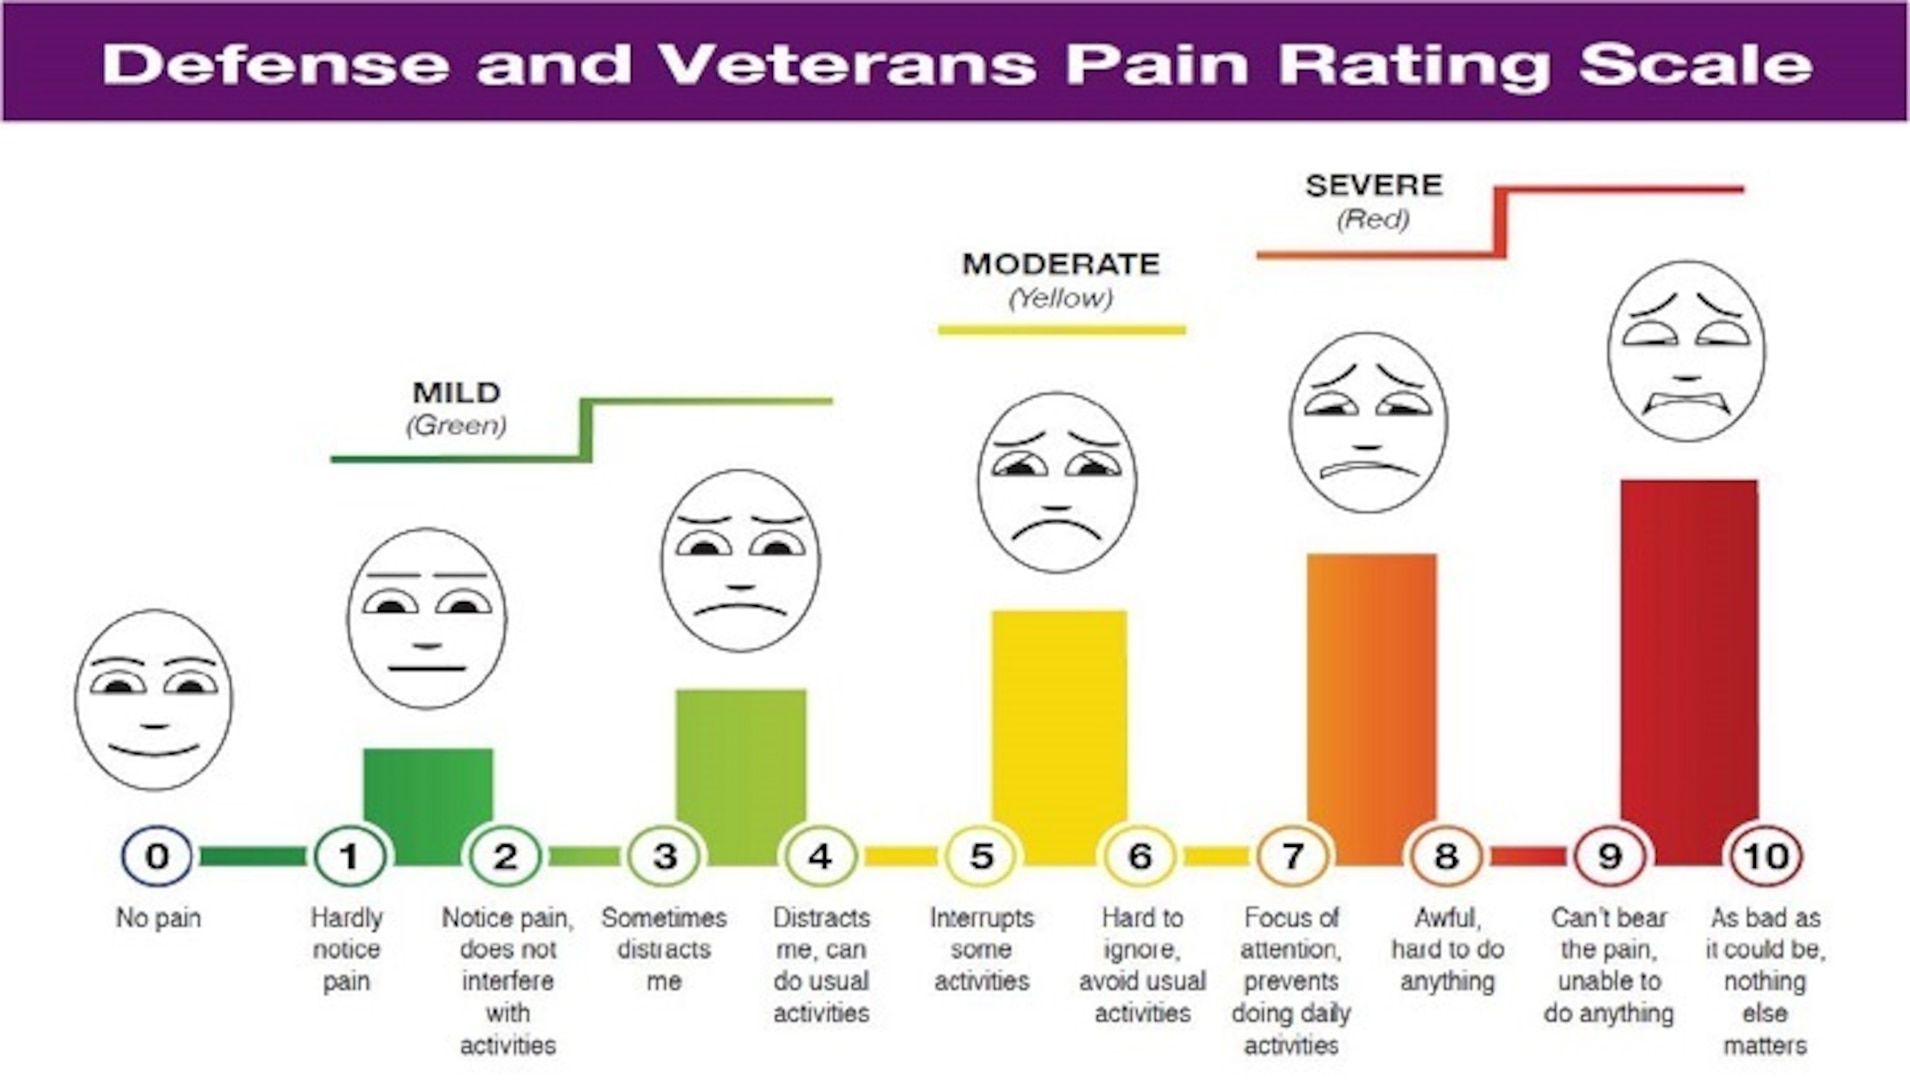 The Defense and Veteran’s Pain Rating Scale